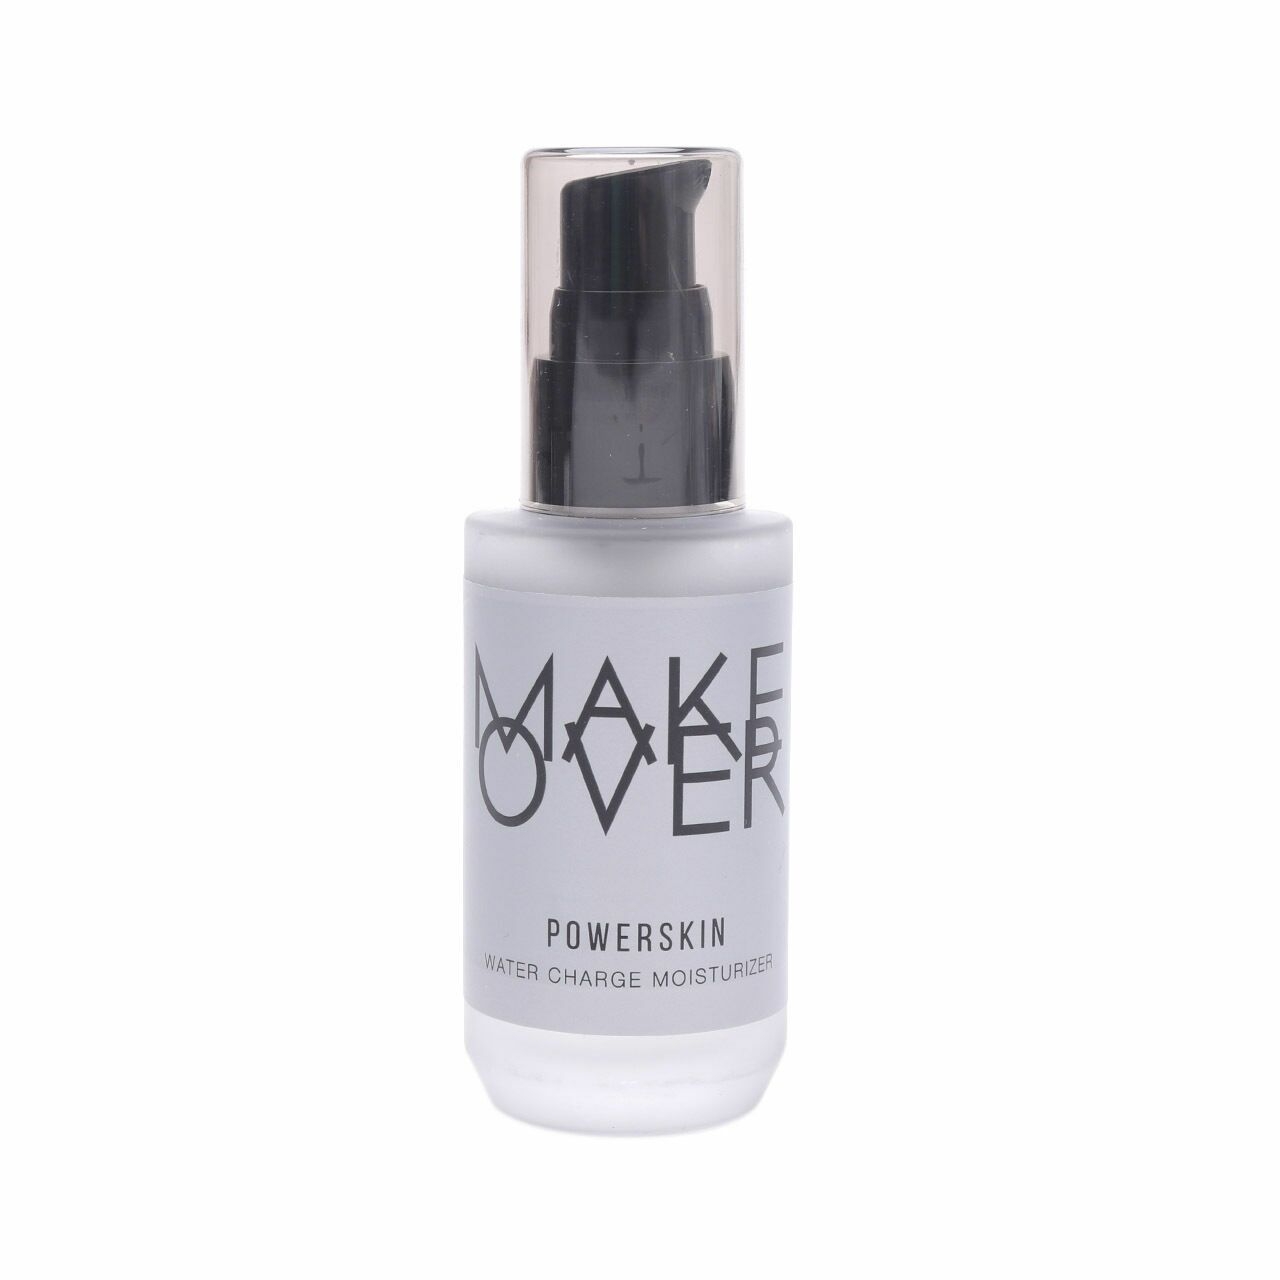 Make Over Powerskin Water Charge Moisturizer Skin Care